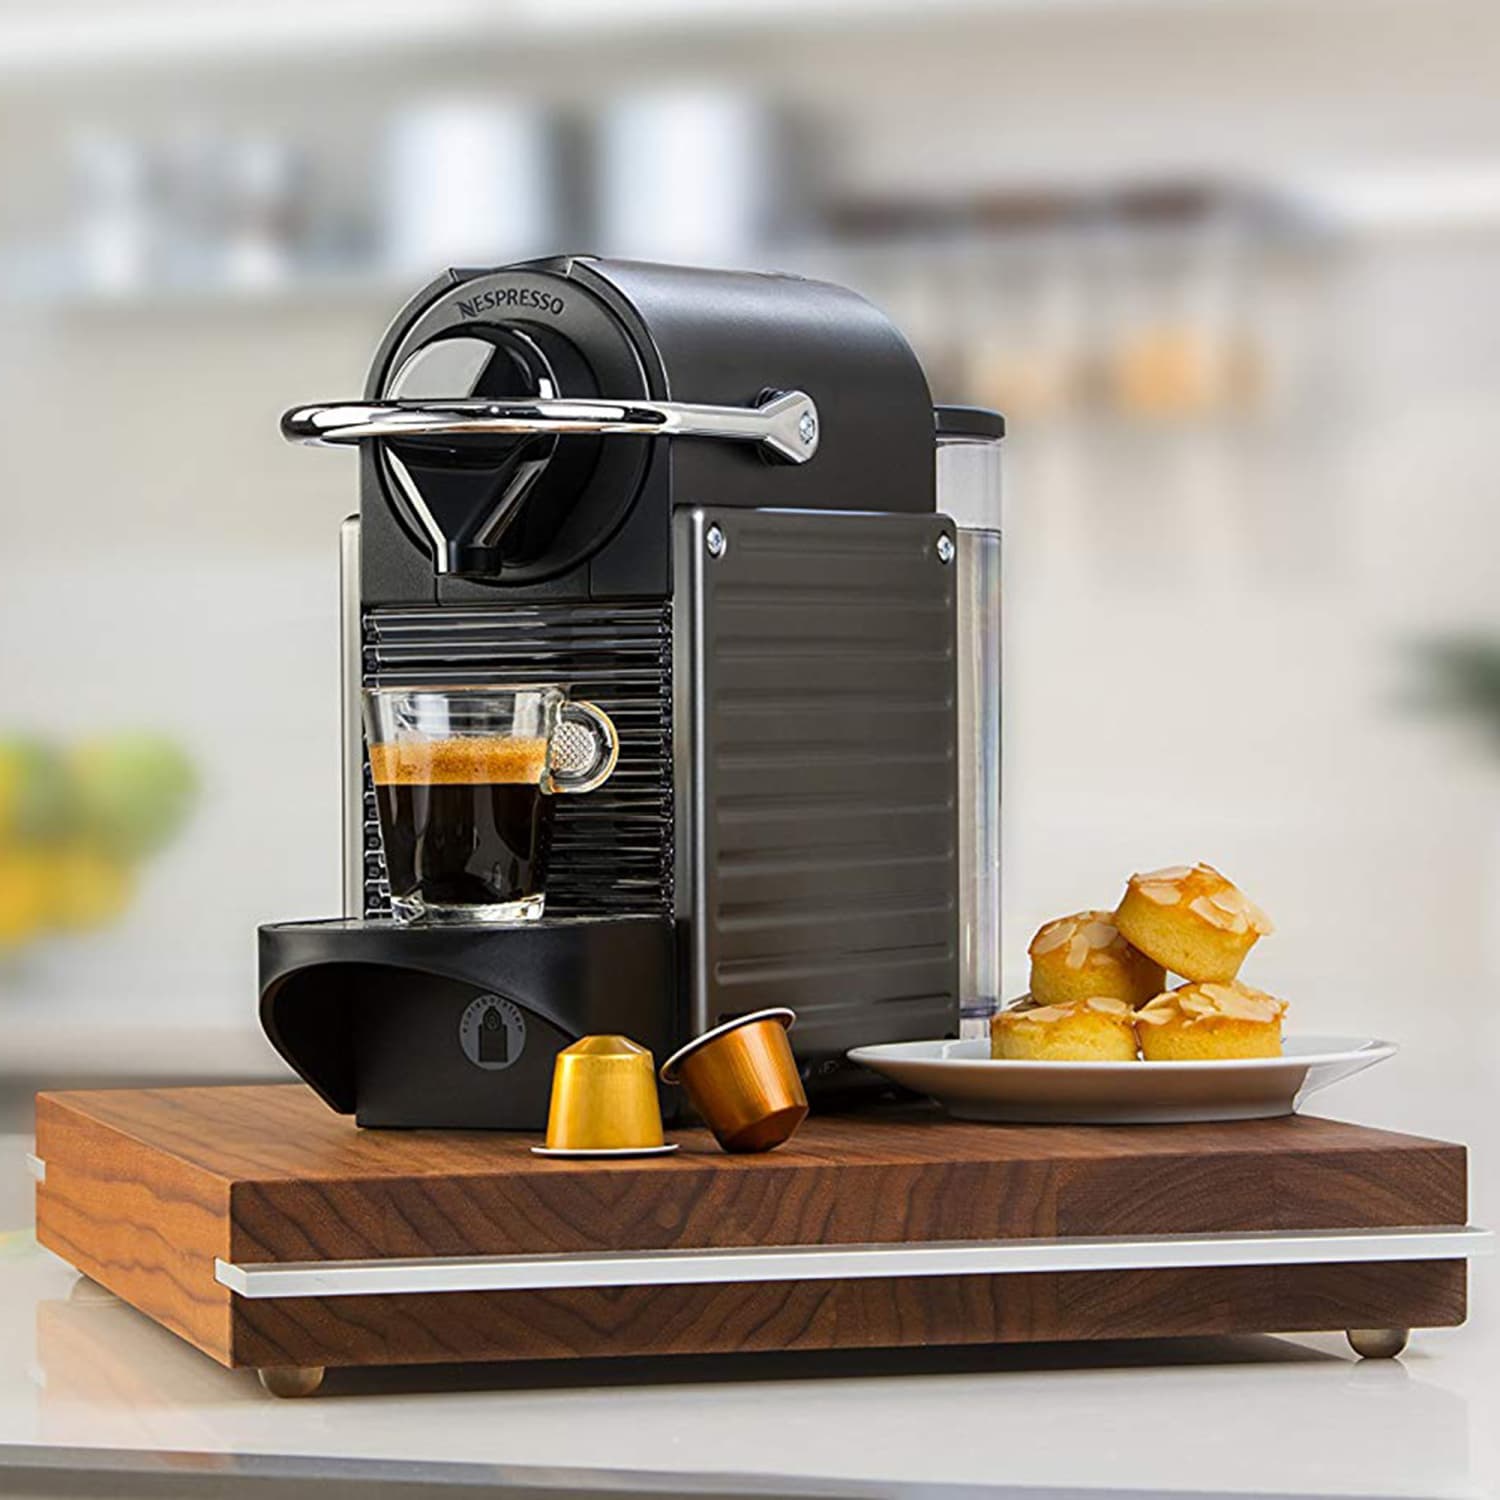 Konsulat Accor At deaktivere The best coffee maker 2019: Nespresso Pixie